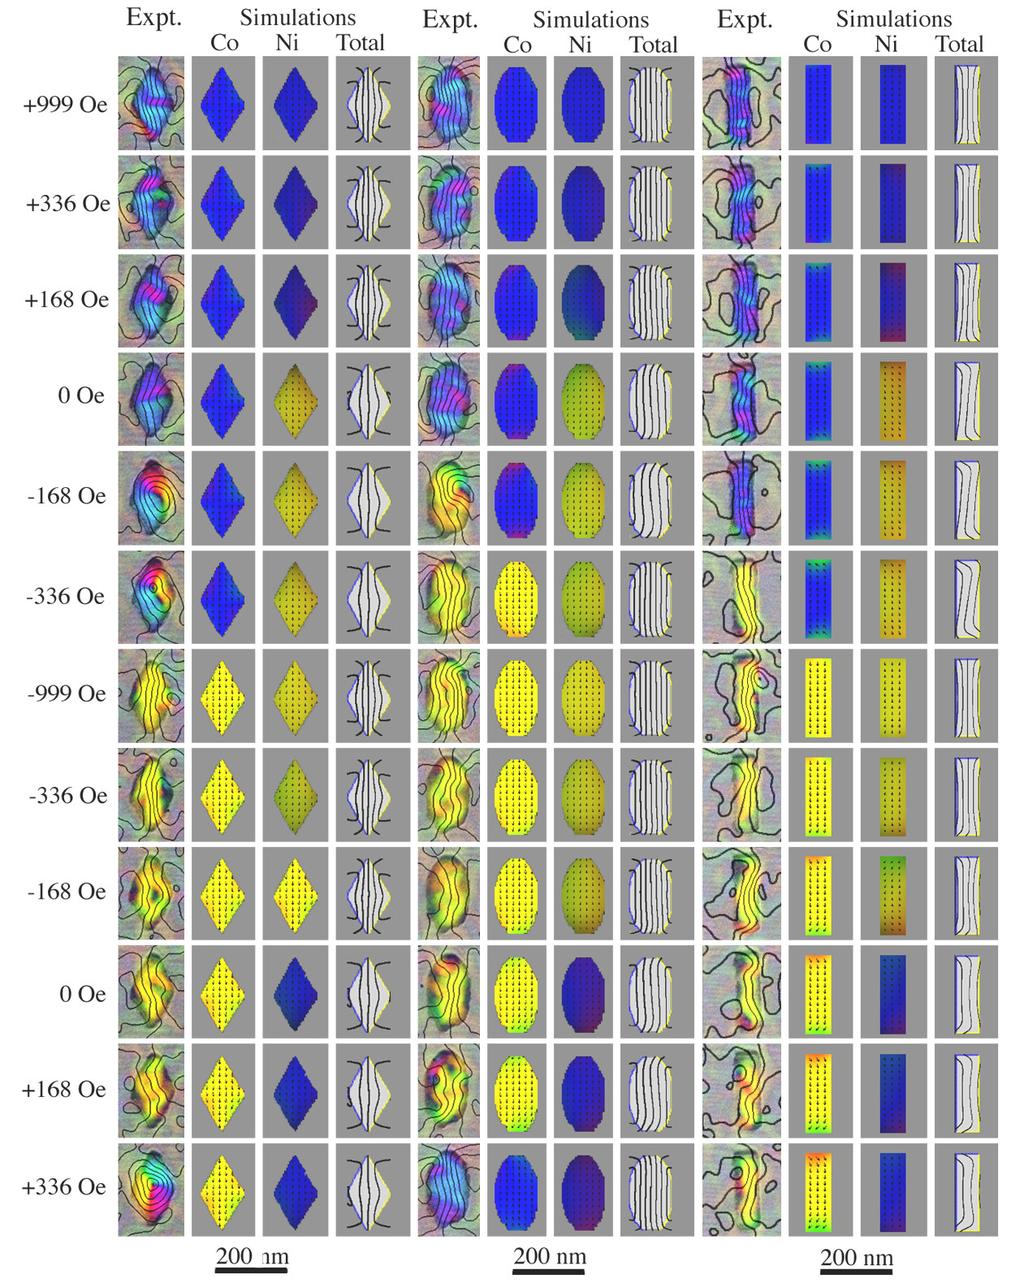 200 nm 200 nm 200 nm Fig.4. Experimental hysteresis cycles for second largest Co/Au/Ni diamonds, ellipses and bars in Fig.